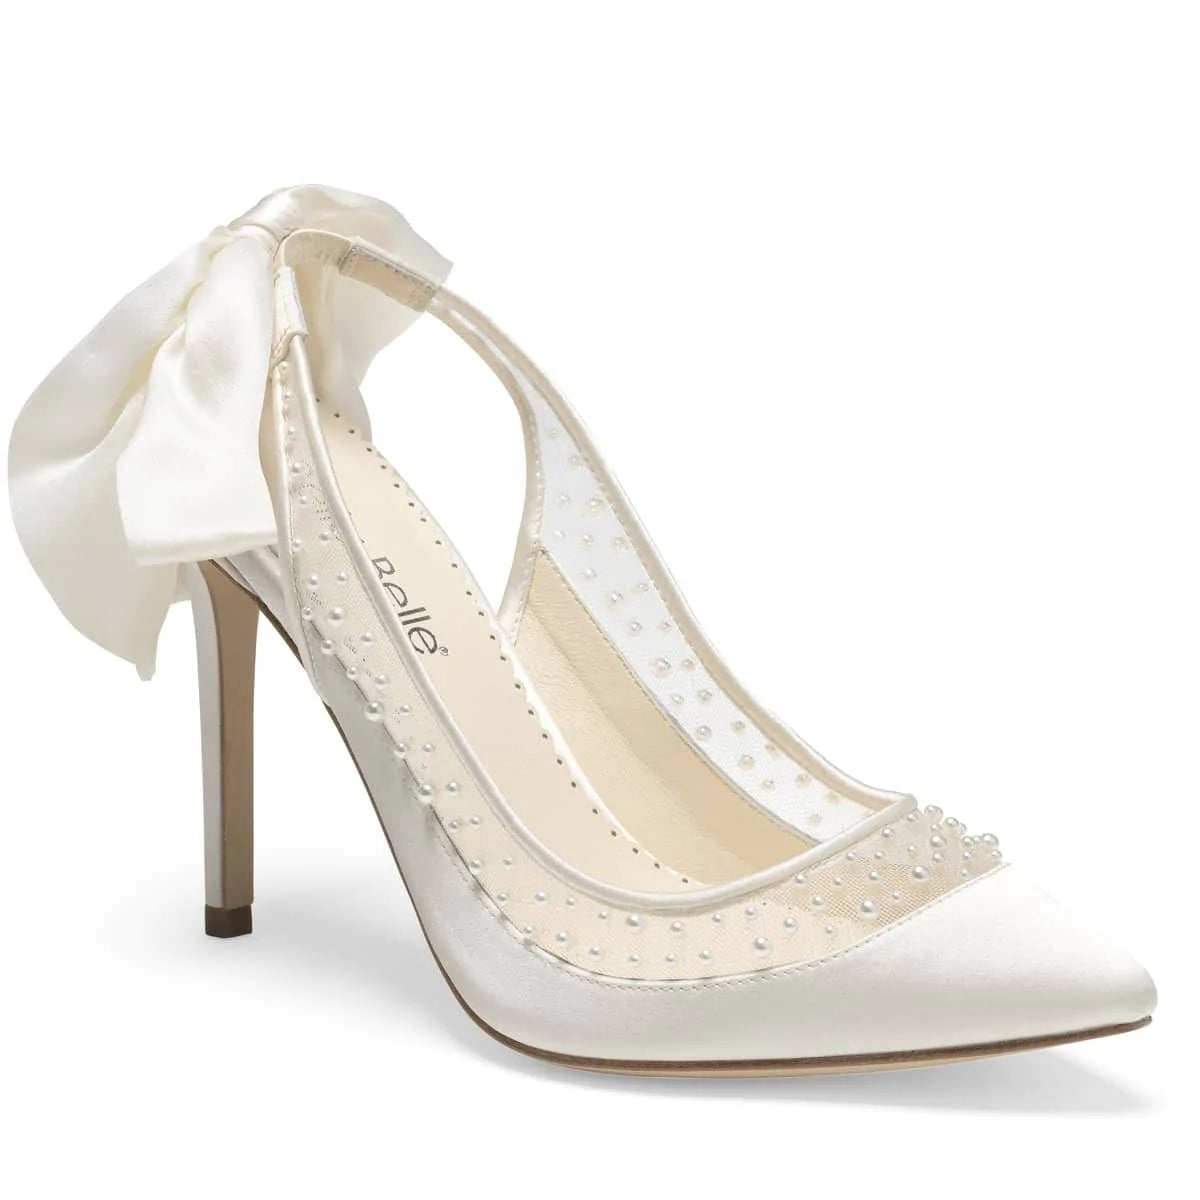 Bella Belle Gabrielle Slingback Wedding Shoes With Pearls & Bows